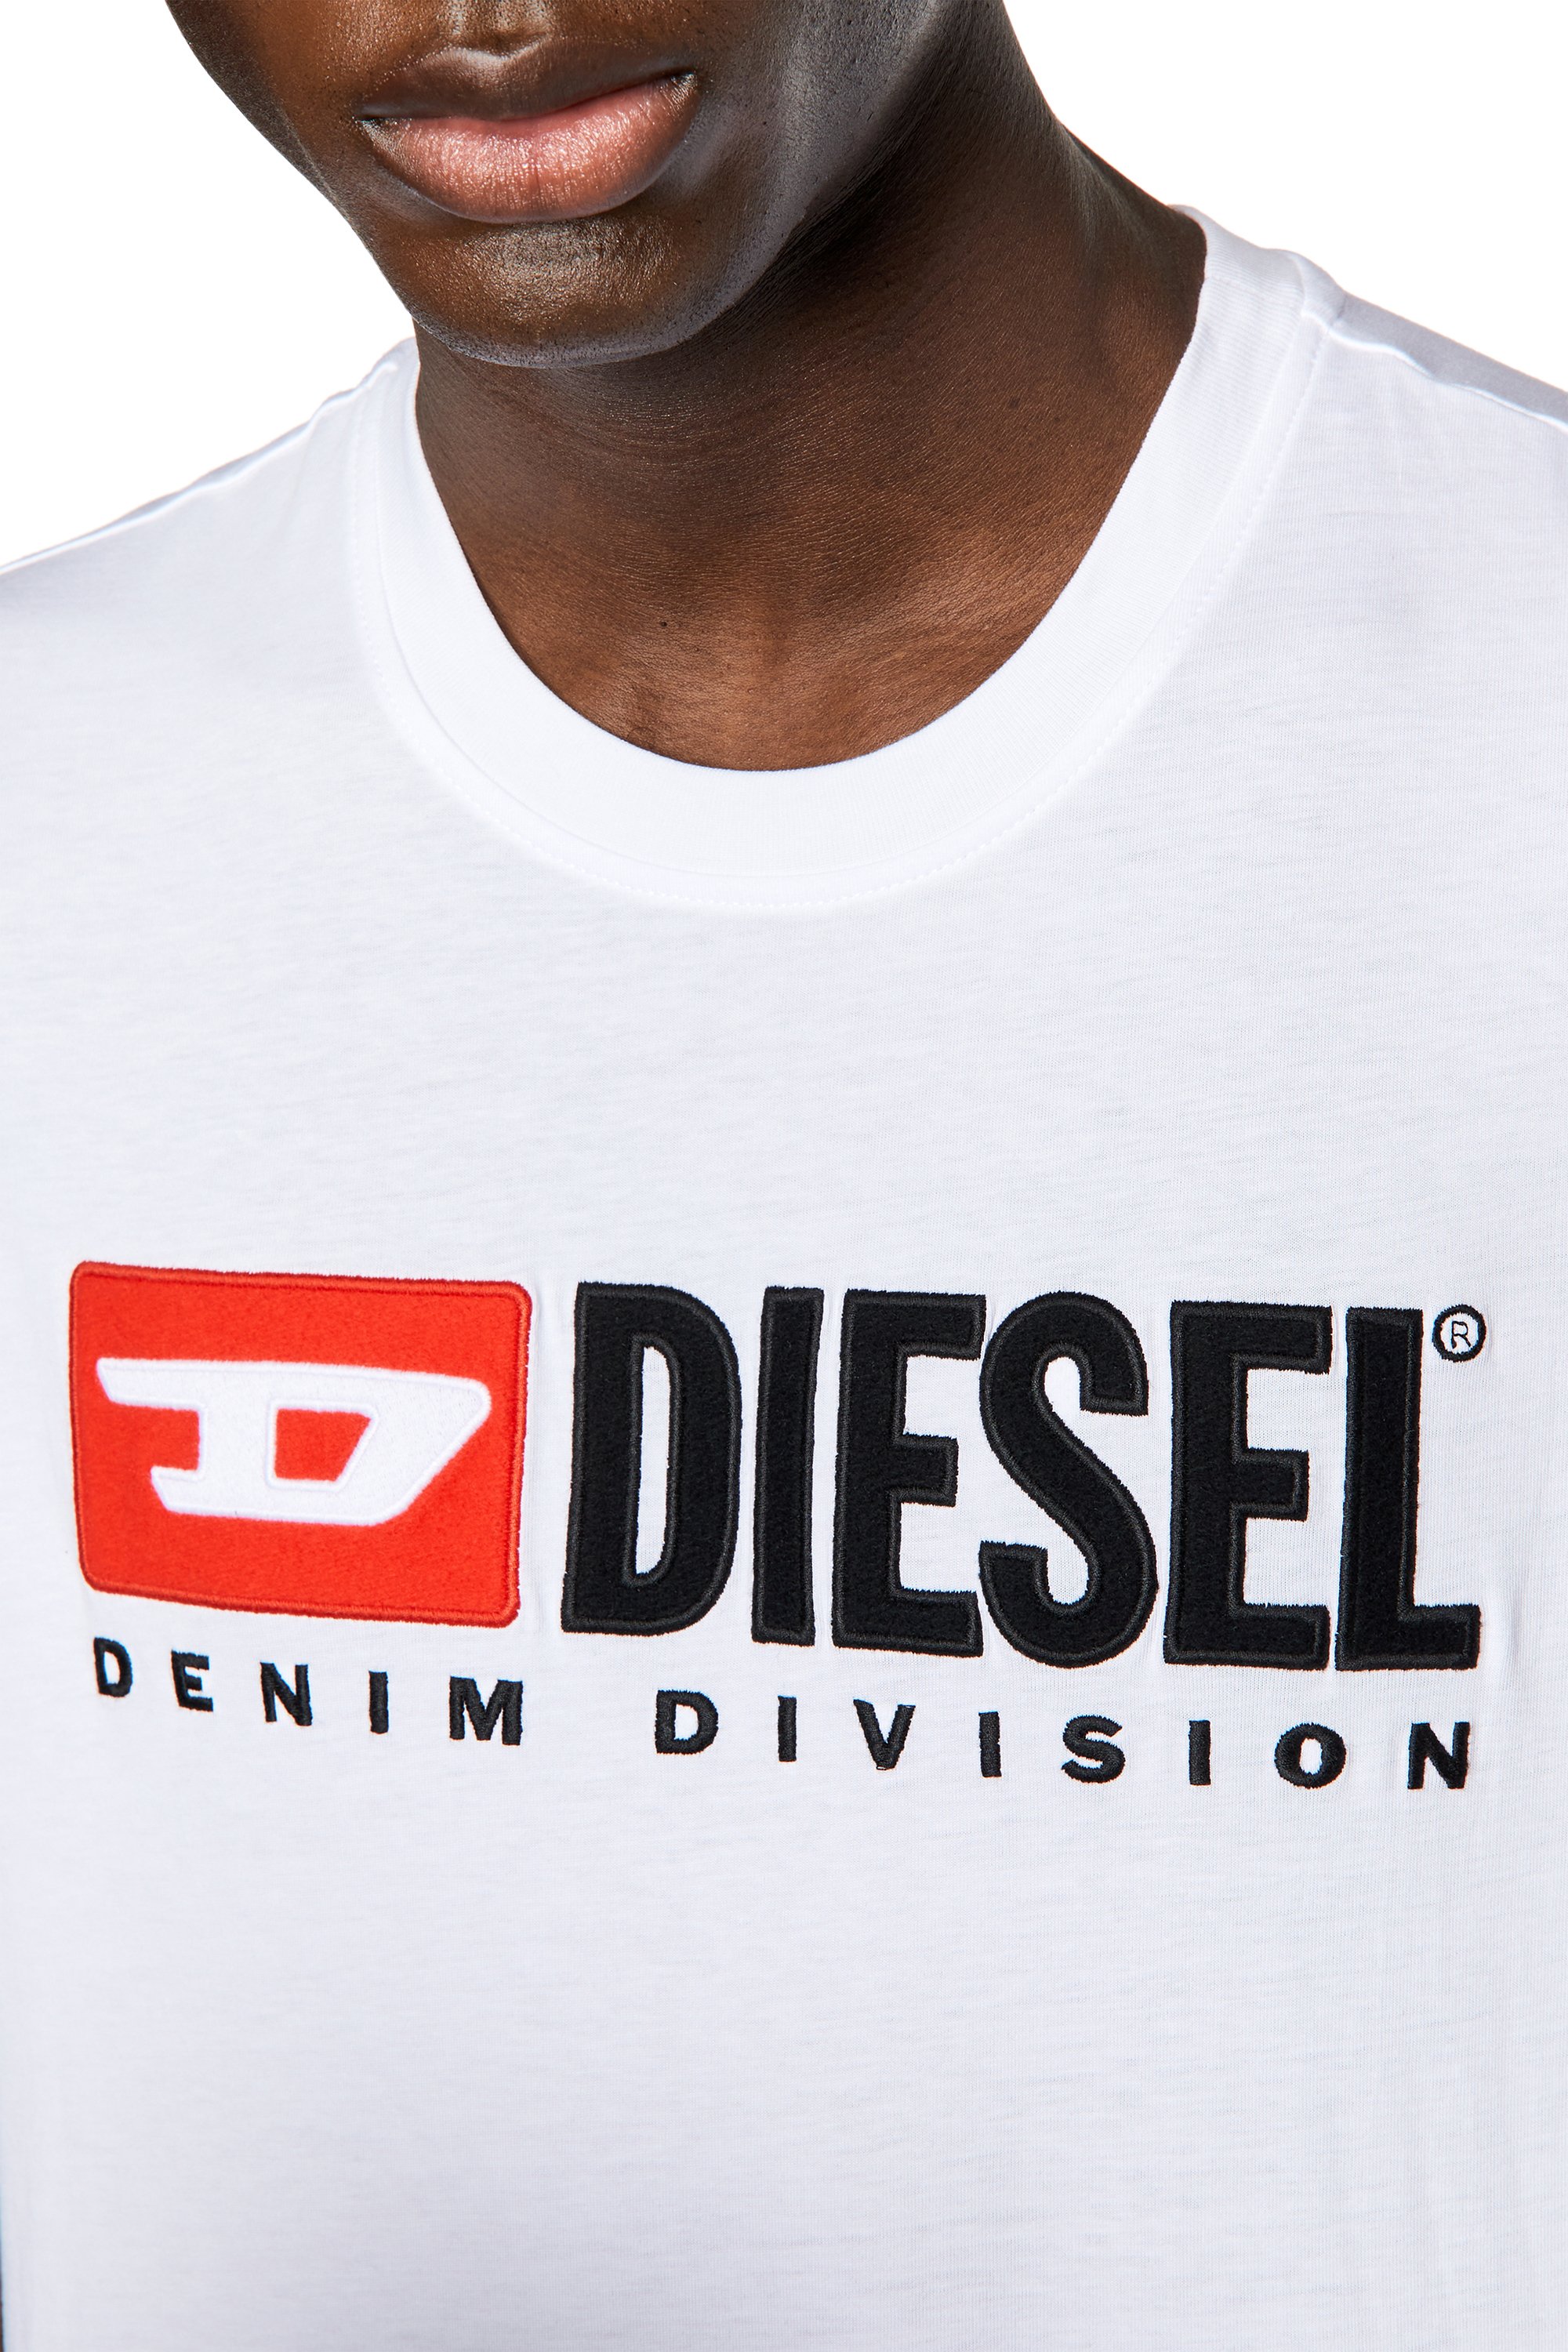  Diesel Mens Diego T-Shirt, XL, White : Clothing, Shoes & Jewelry